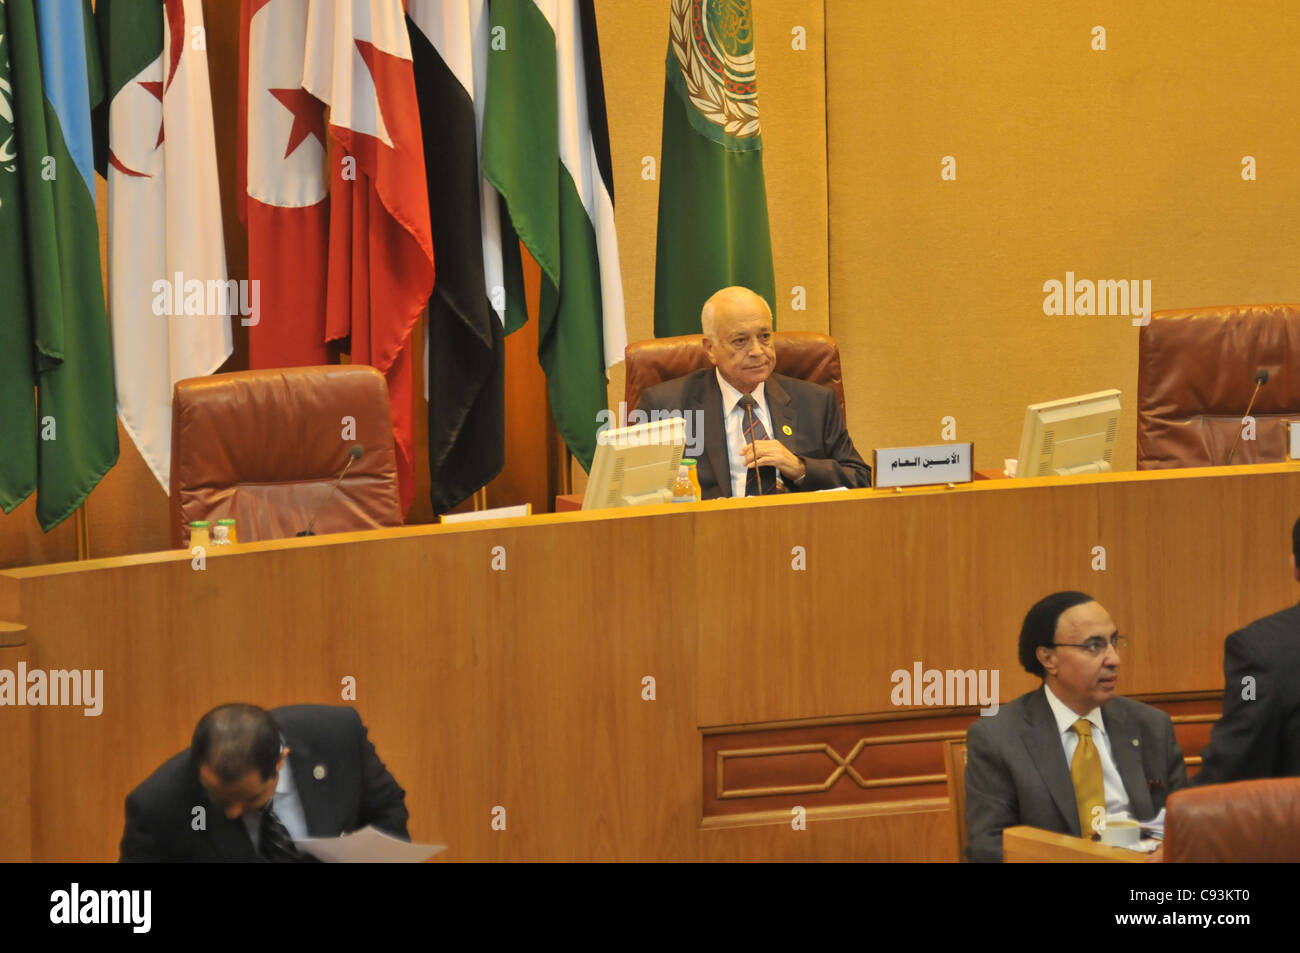 Nabil Al Araby, Secr Gen of the Arab League in Cairo, during a visit to the Arab League body by Turkish Prime Minister  Erdogan Stock Photo